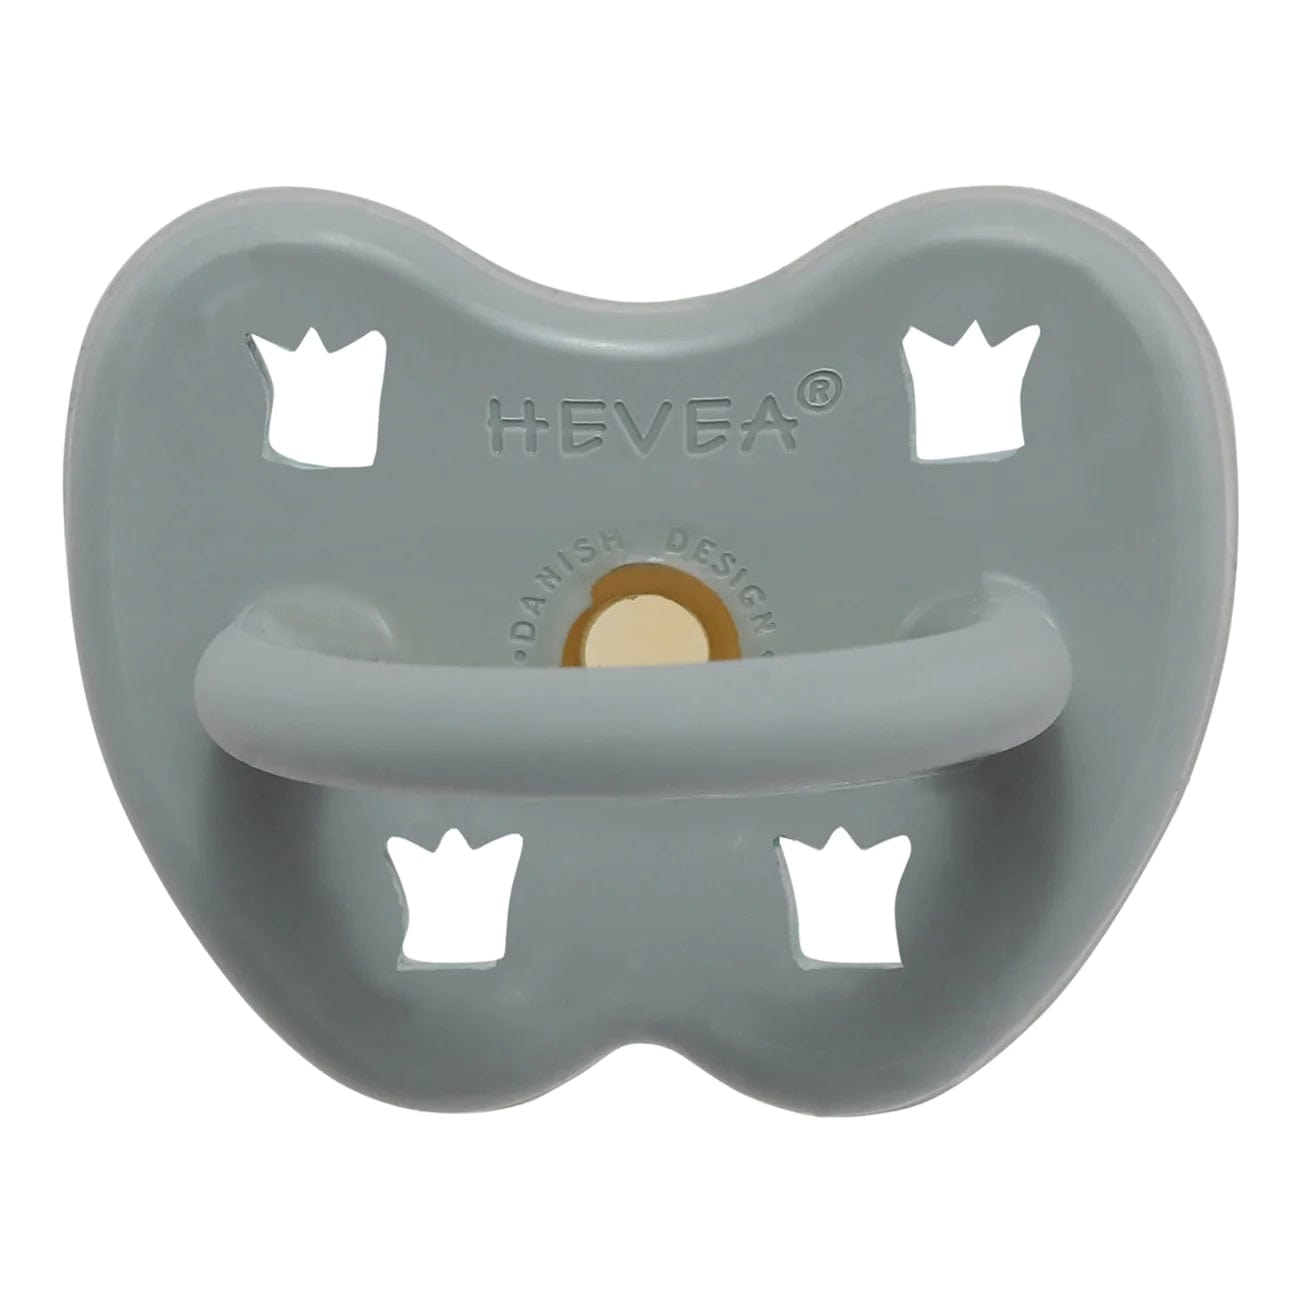 Hevea Pacifier Gorgeous Grey Round 3-36 months Hevea Pacifiers & Teethers Lil Tulips